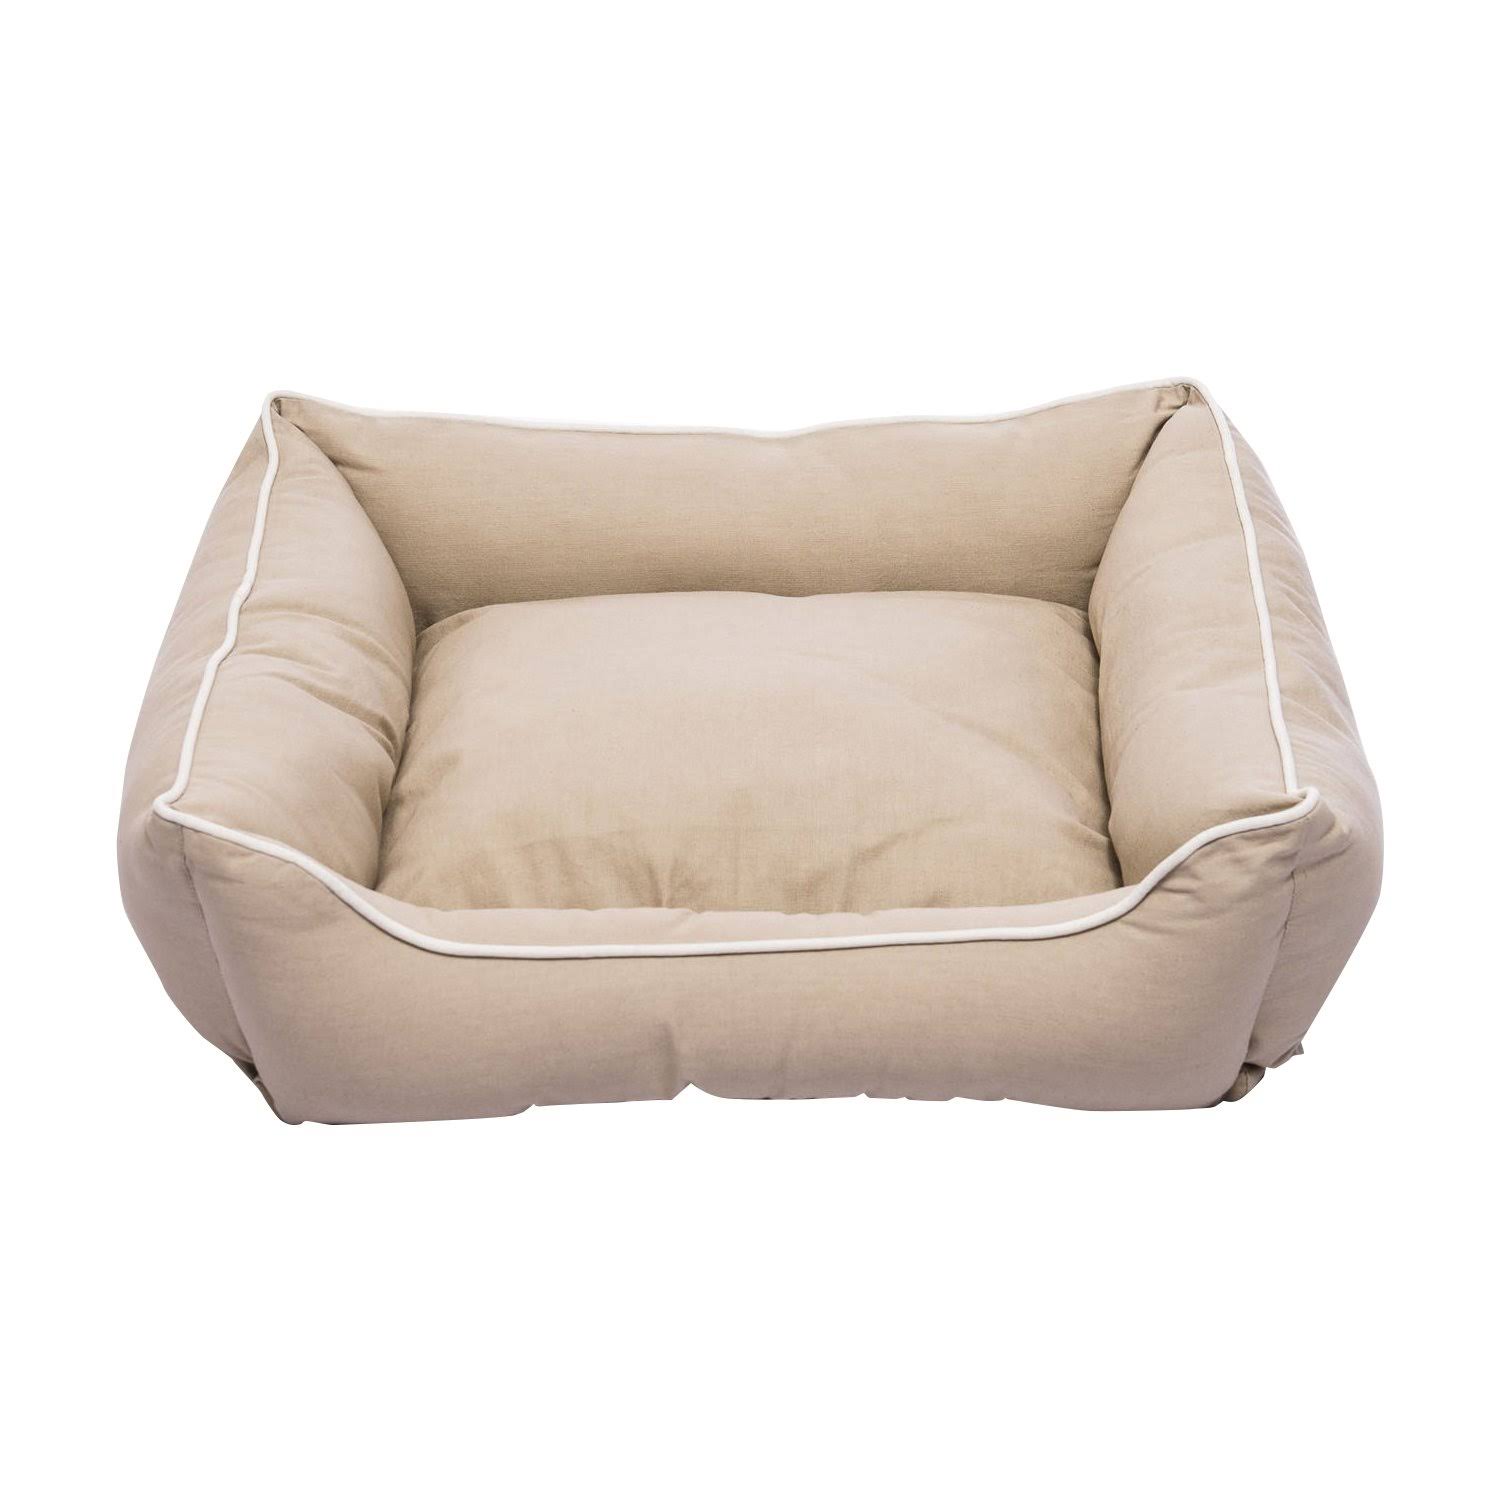 Dog Gone Smart Repelz It Lounger Bed - Sand, Small